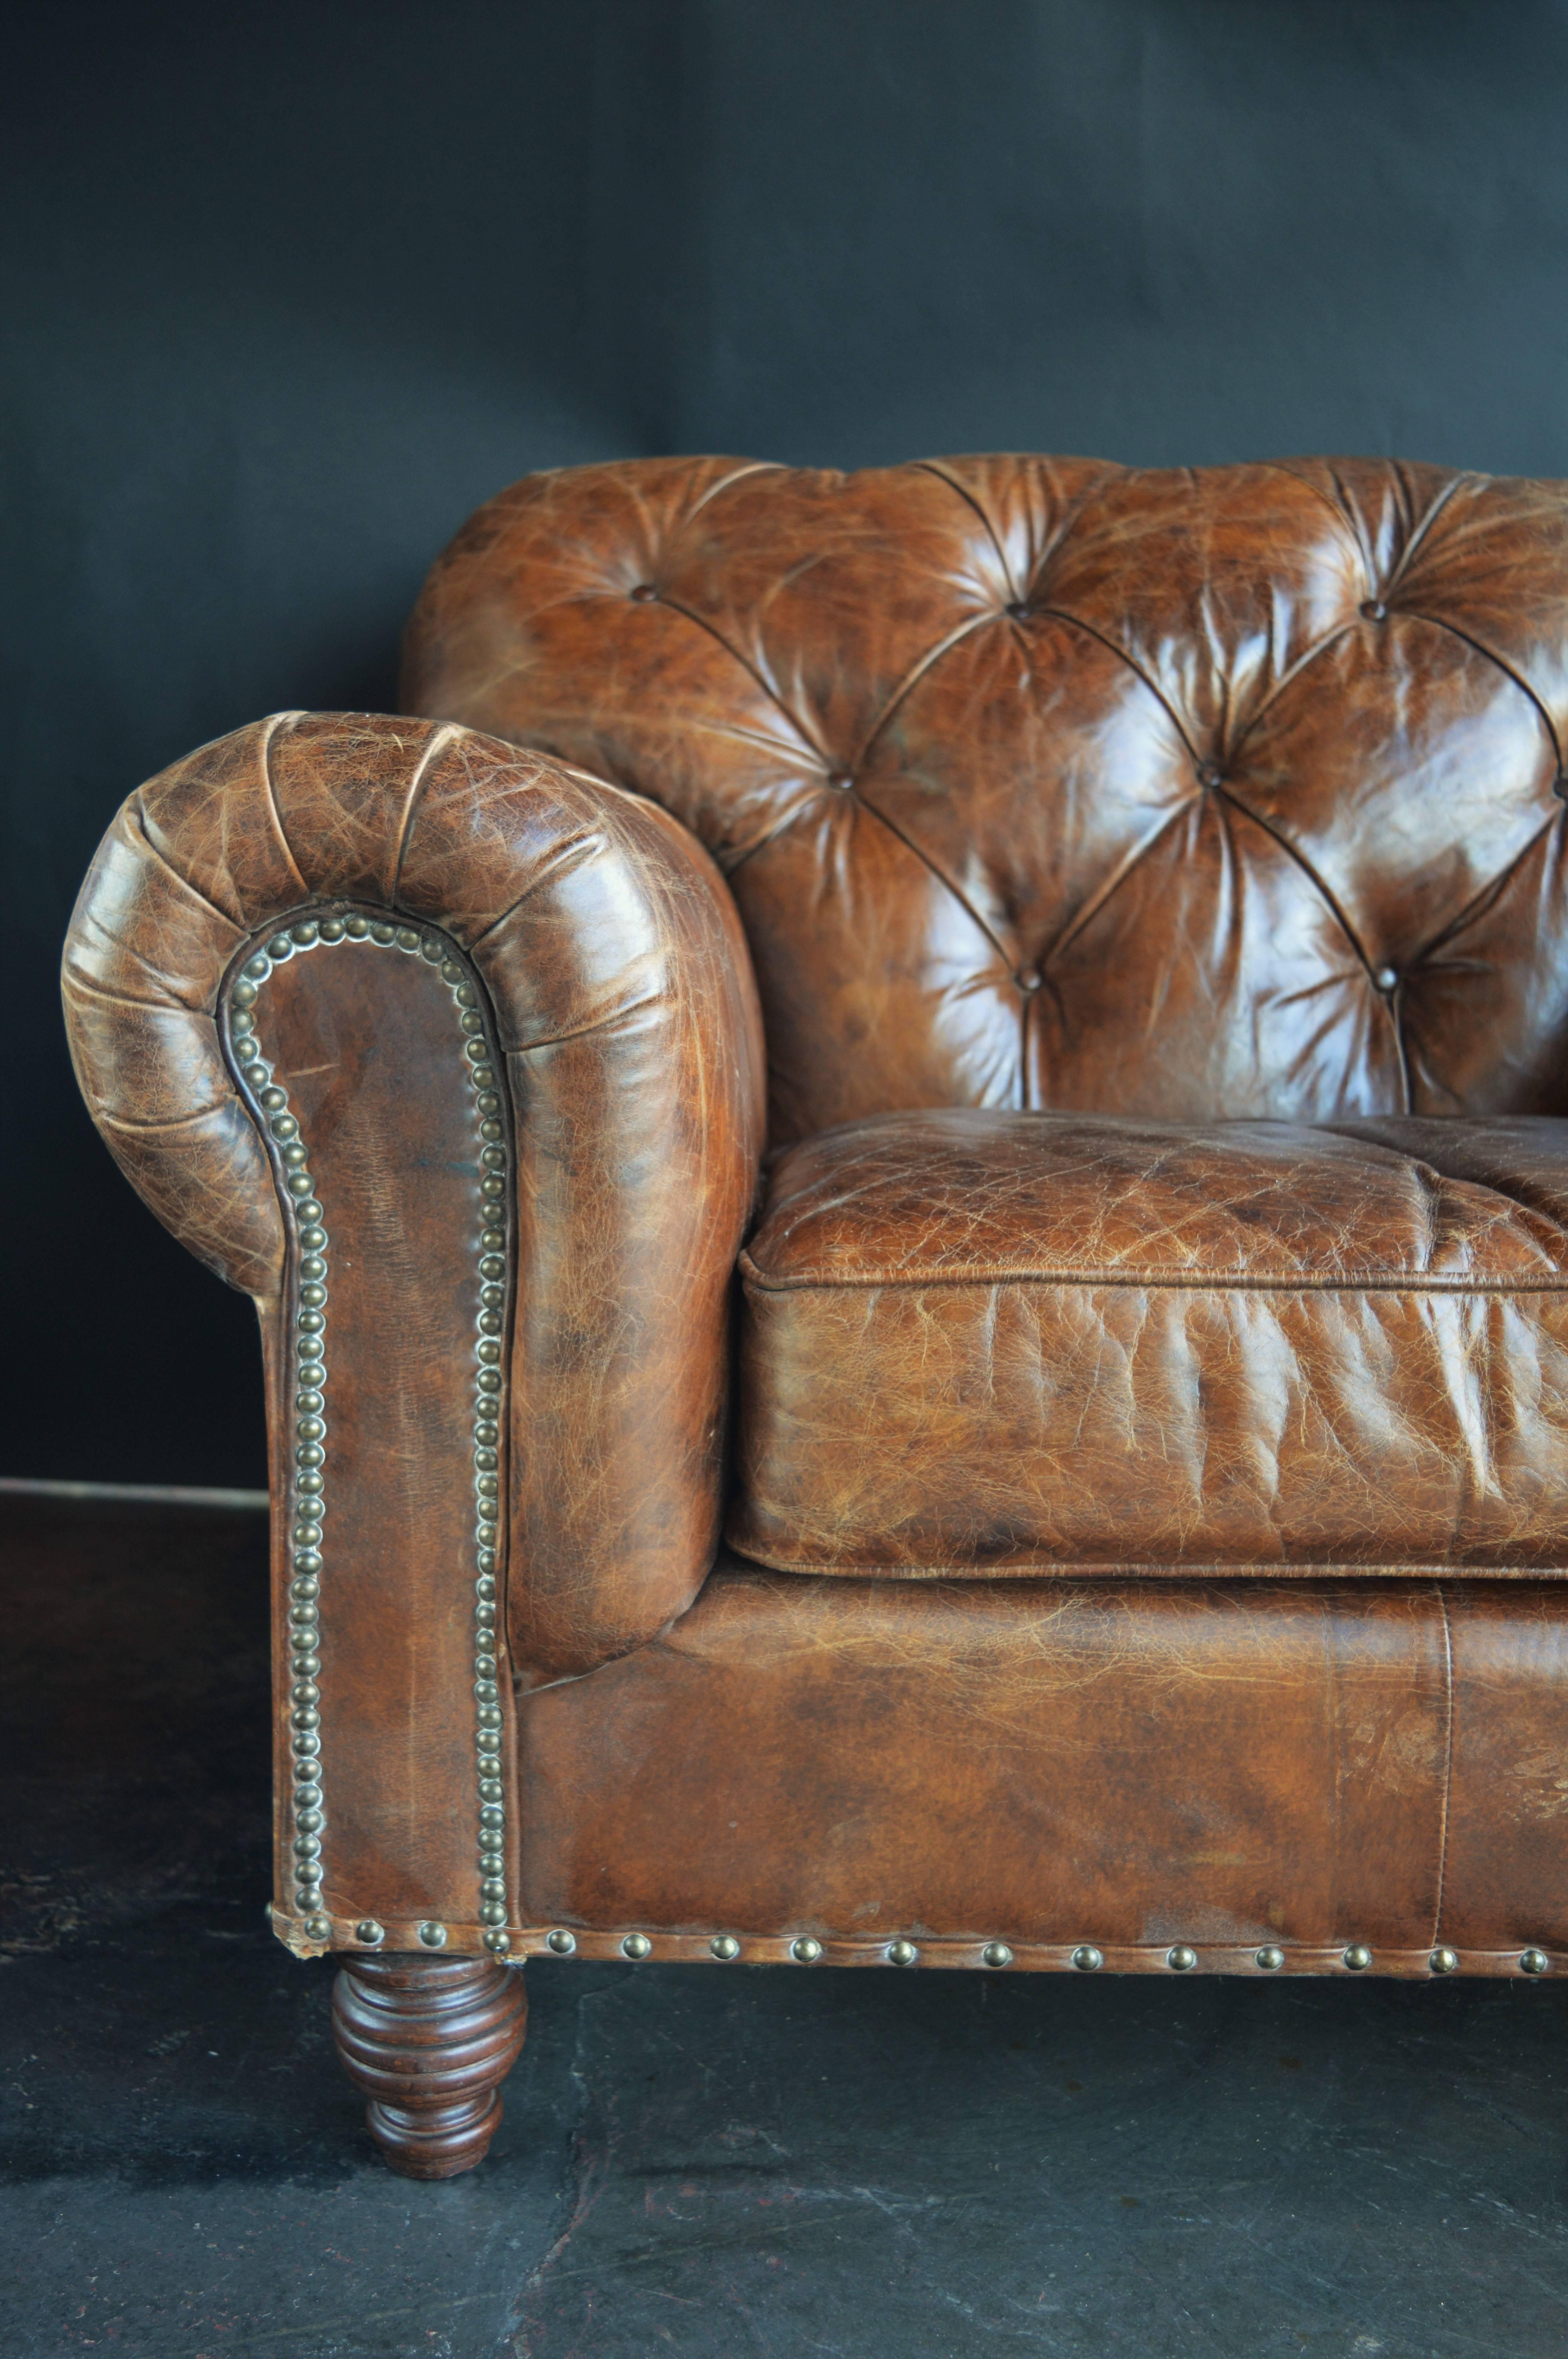 Pair of leather Chesterfield club chairs with distressed leather. Tufted button-back.